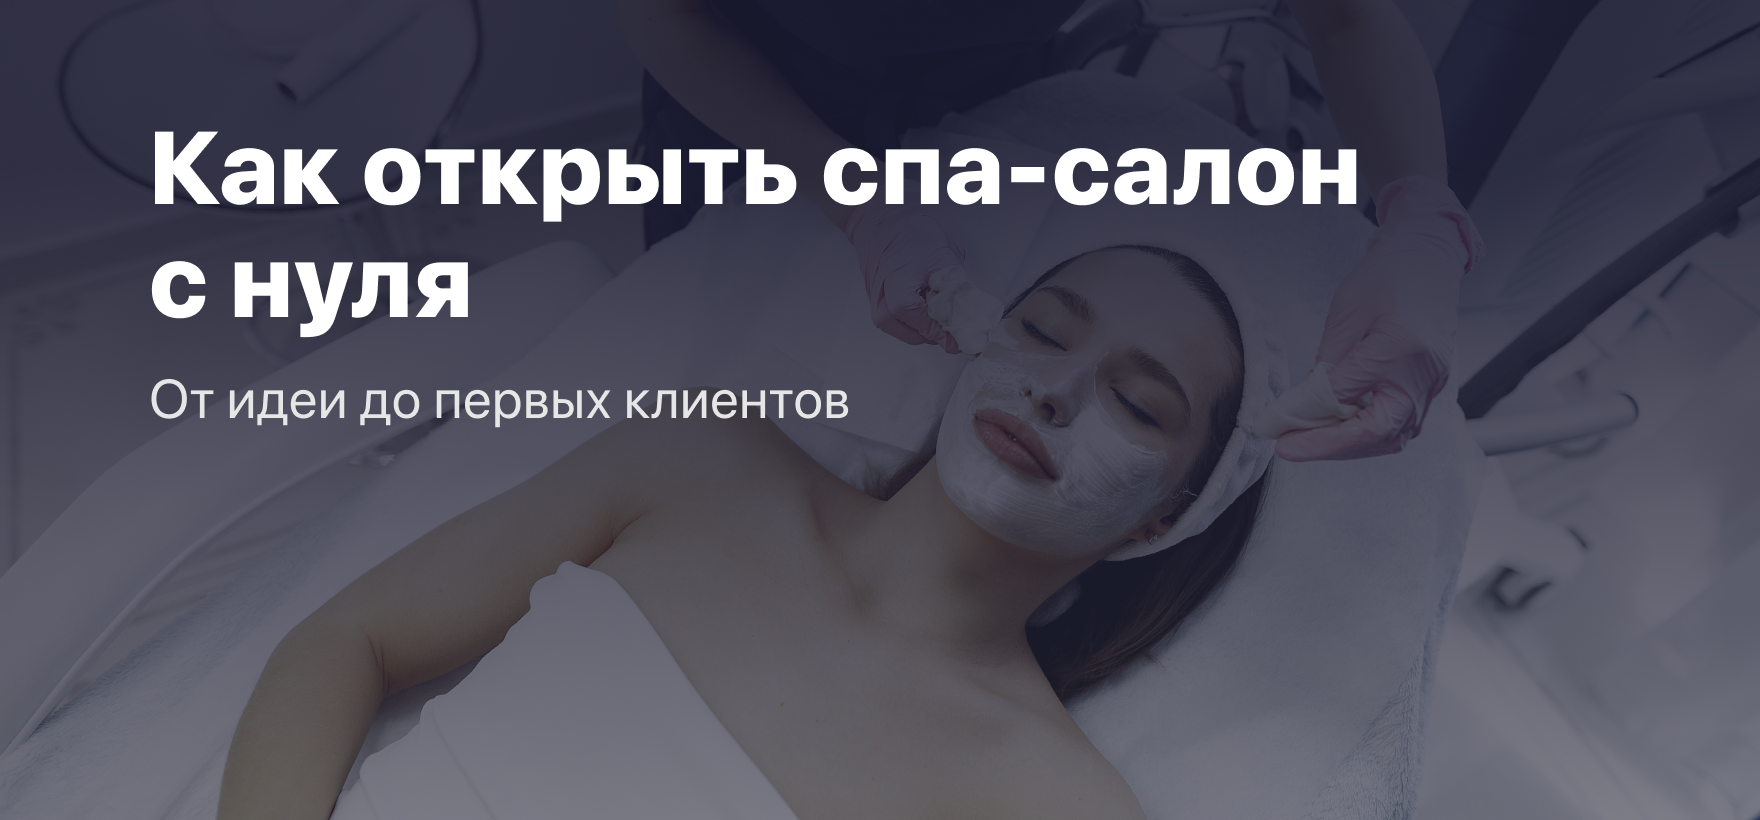 <p class="qtranxs-available-languages-message qtranxs-available-languages-message-en">Sorry, this entry is only available in <a href="https://beautyprosoftware.com/ru/blog/russkij-kak-otkryt-spa-salon-sostavljaem-biznes-plan/" class="qtranxs-available-language-link qtranxs-available-language-link-ru" title="Русский">Russian</a>.</p>